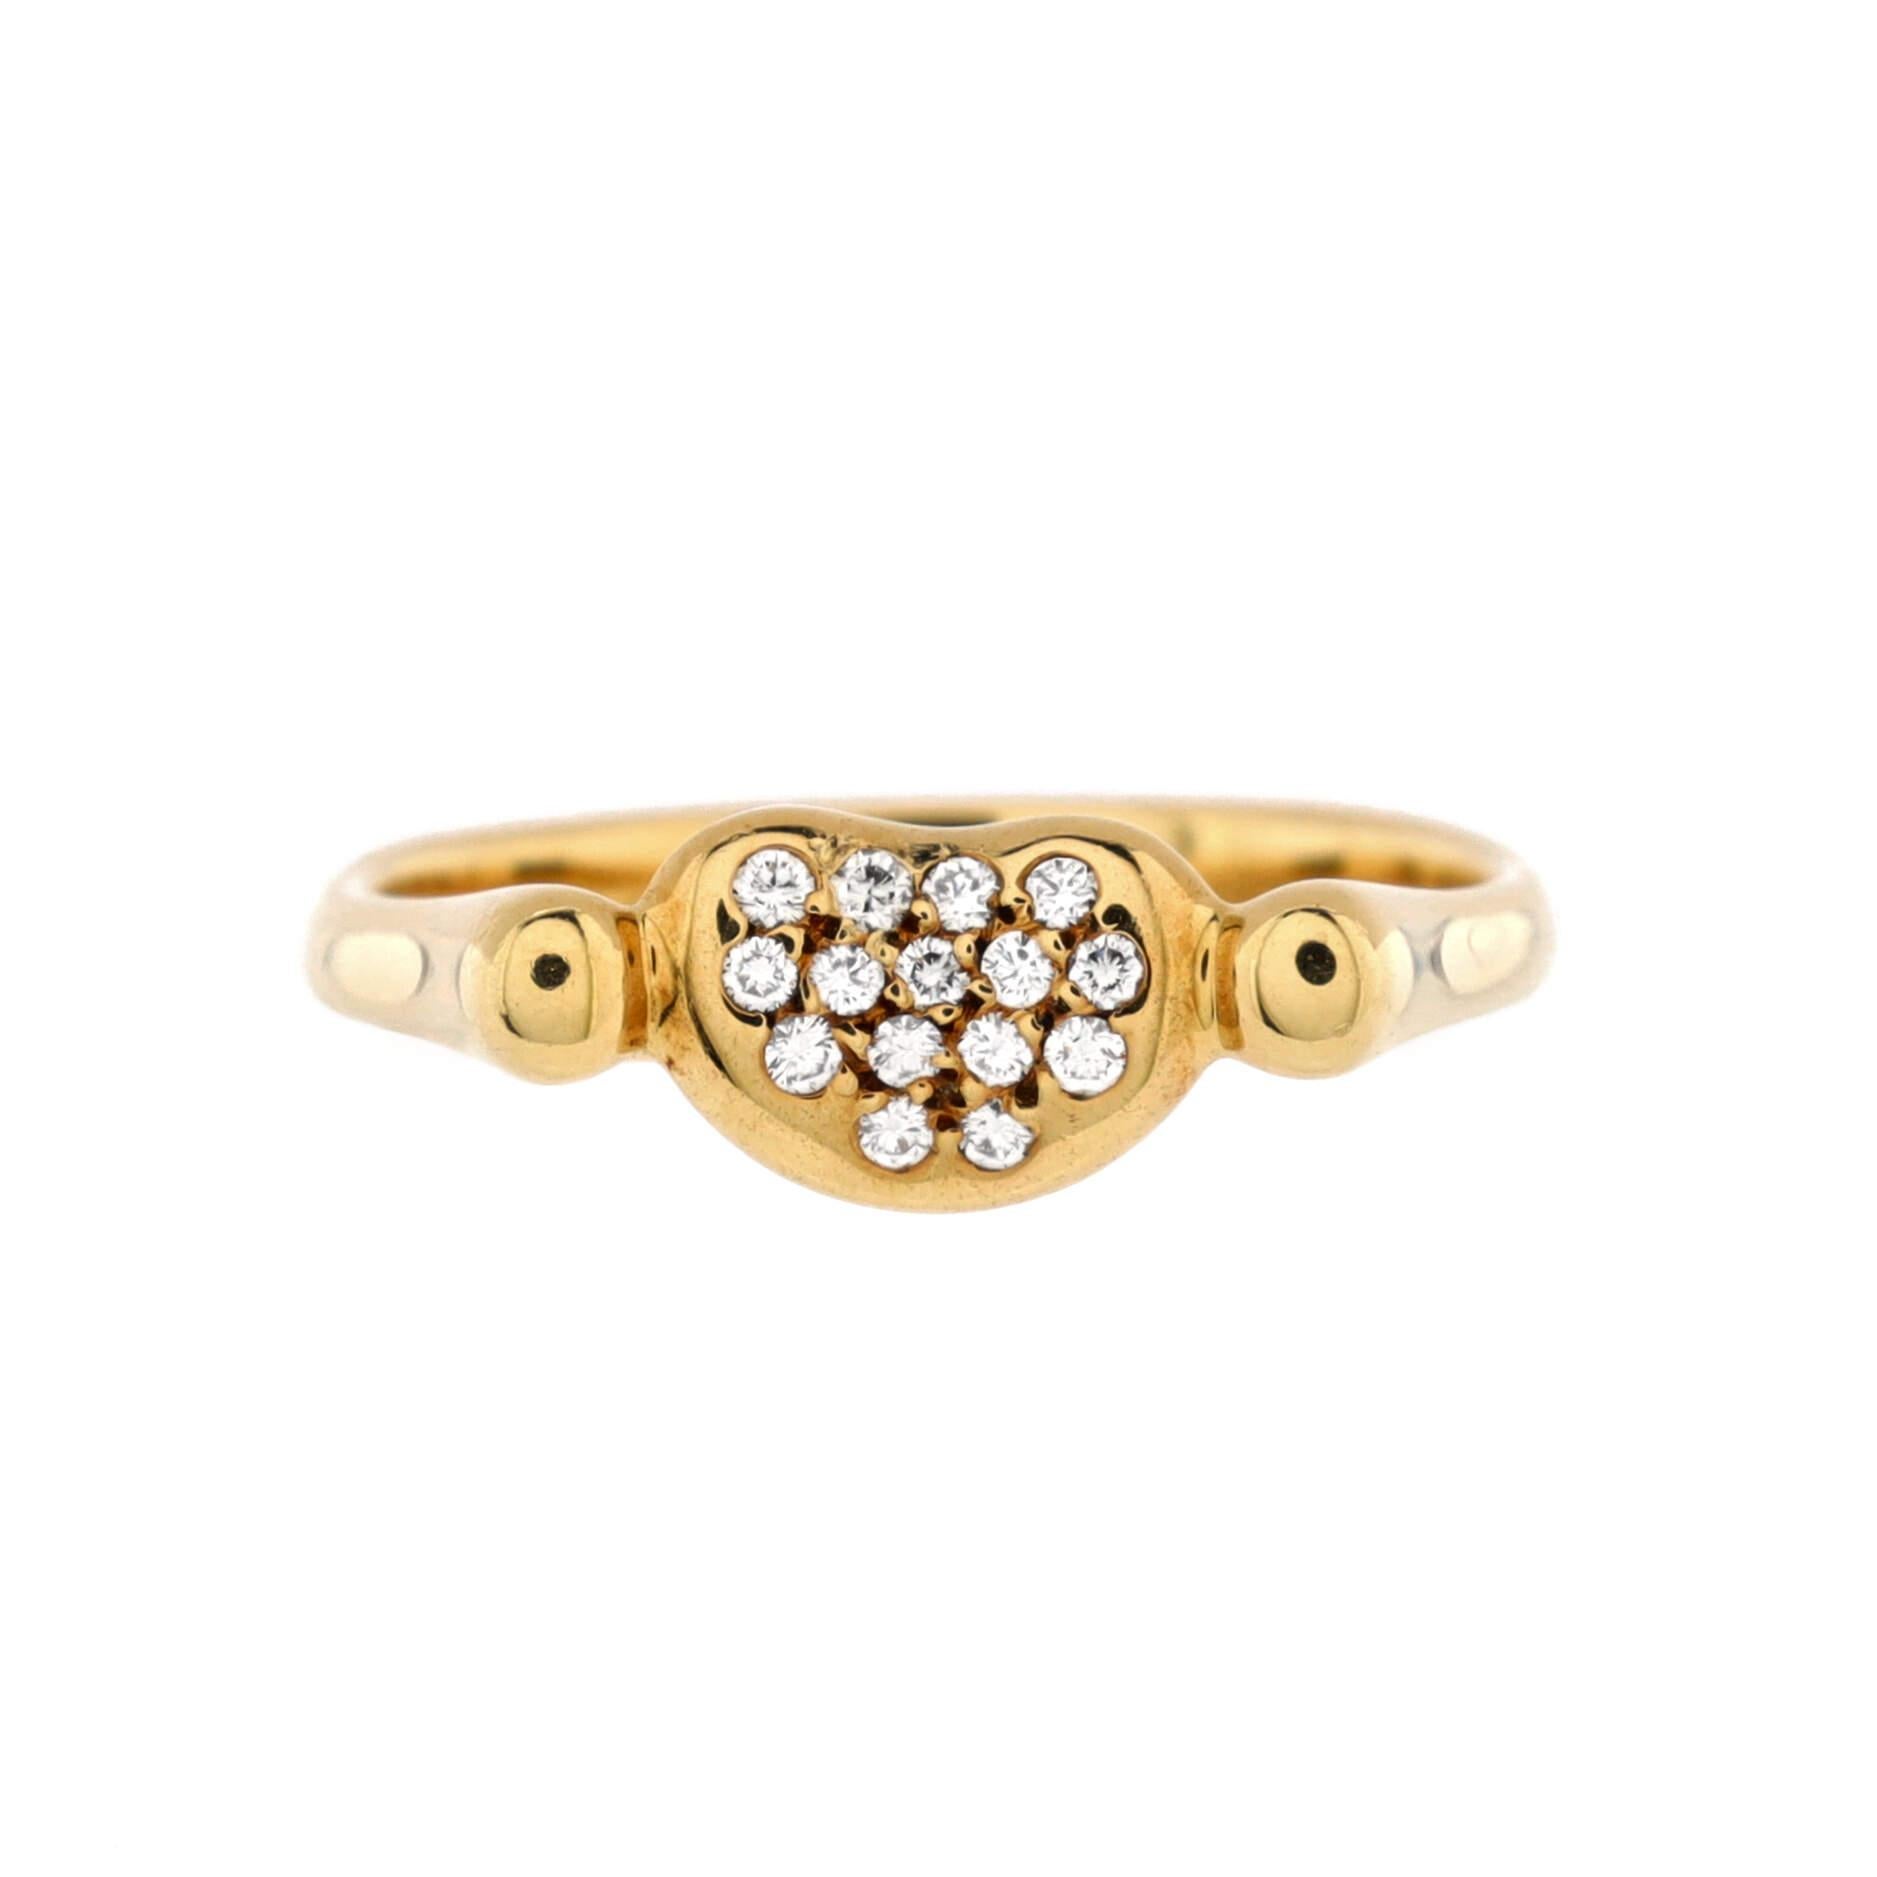 Condition: Very good. Moderate wear throughout.
Accessories: No Accessories
Measurements: Size: 6.25 - 53, Width: 3.20 mm
Designer: Tiffany & Co.
Model: Elsa Peretti Bean Band Ring 18K Yellow Gold with Diamonds
Exterior Color: Yellow Gold
Item